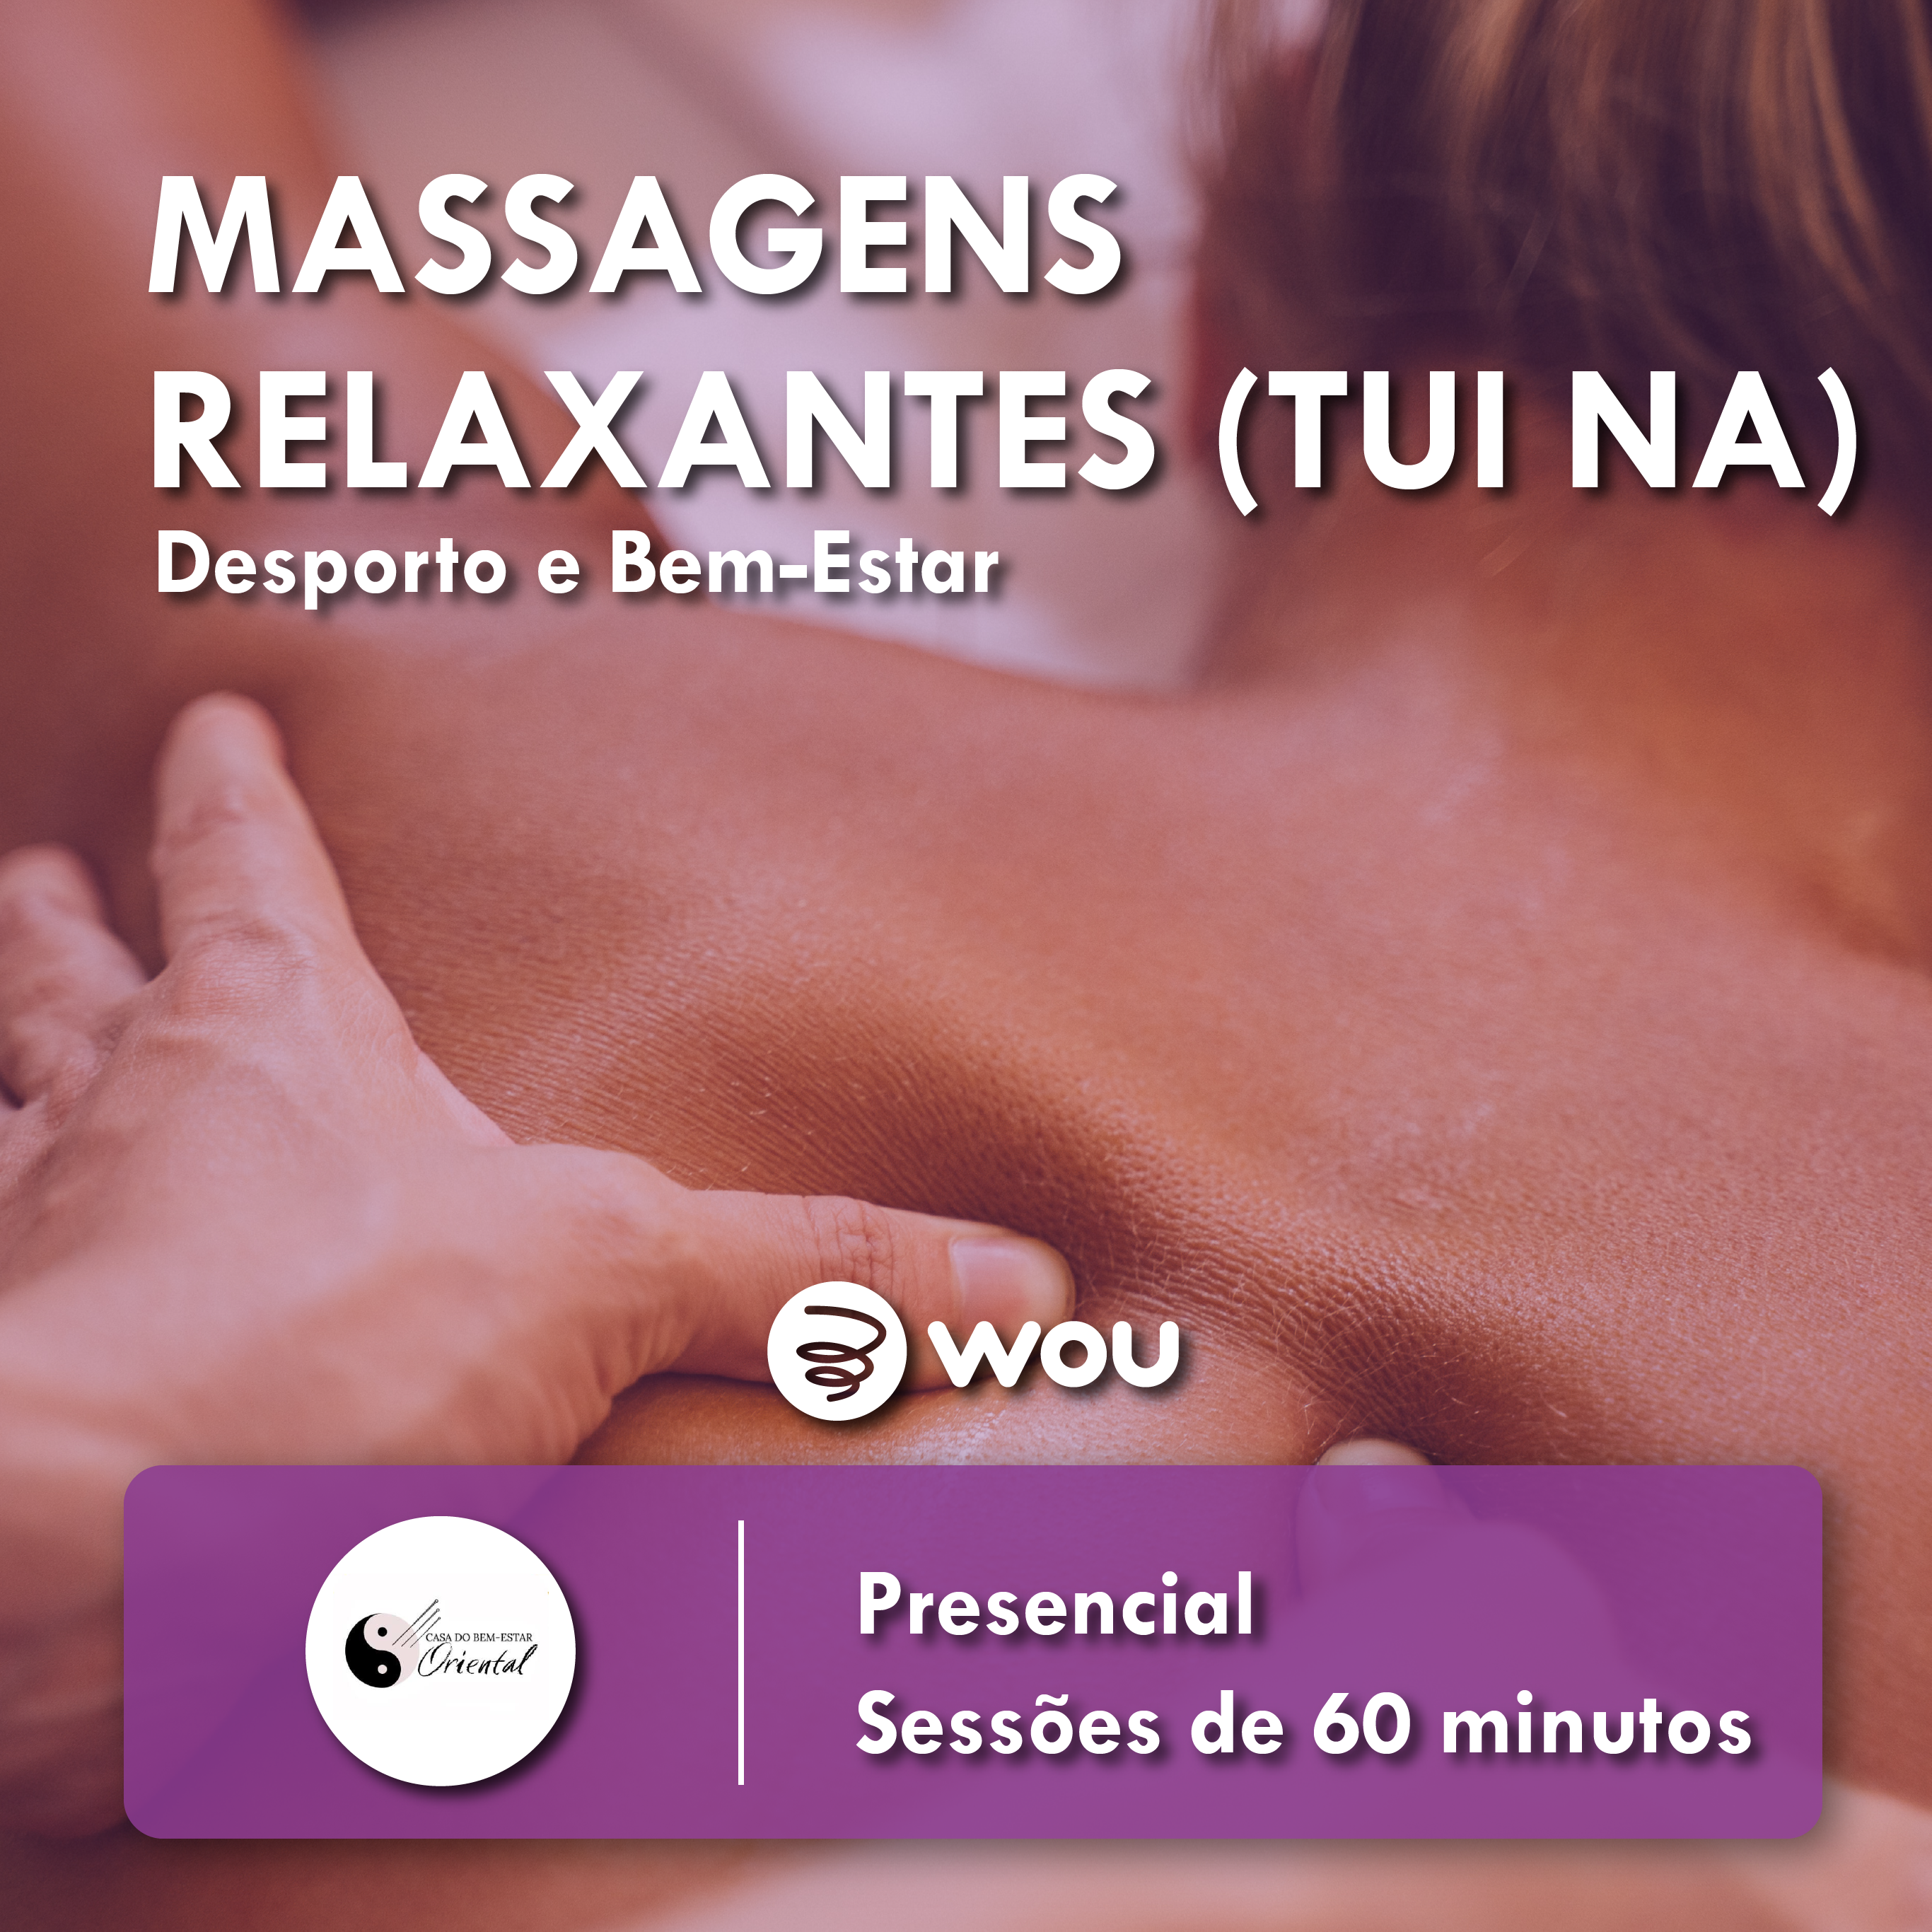 (Tui Na) Relaxing Massages in Coimbra